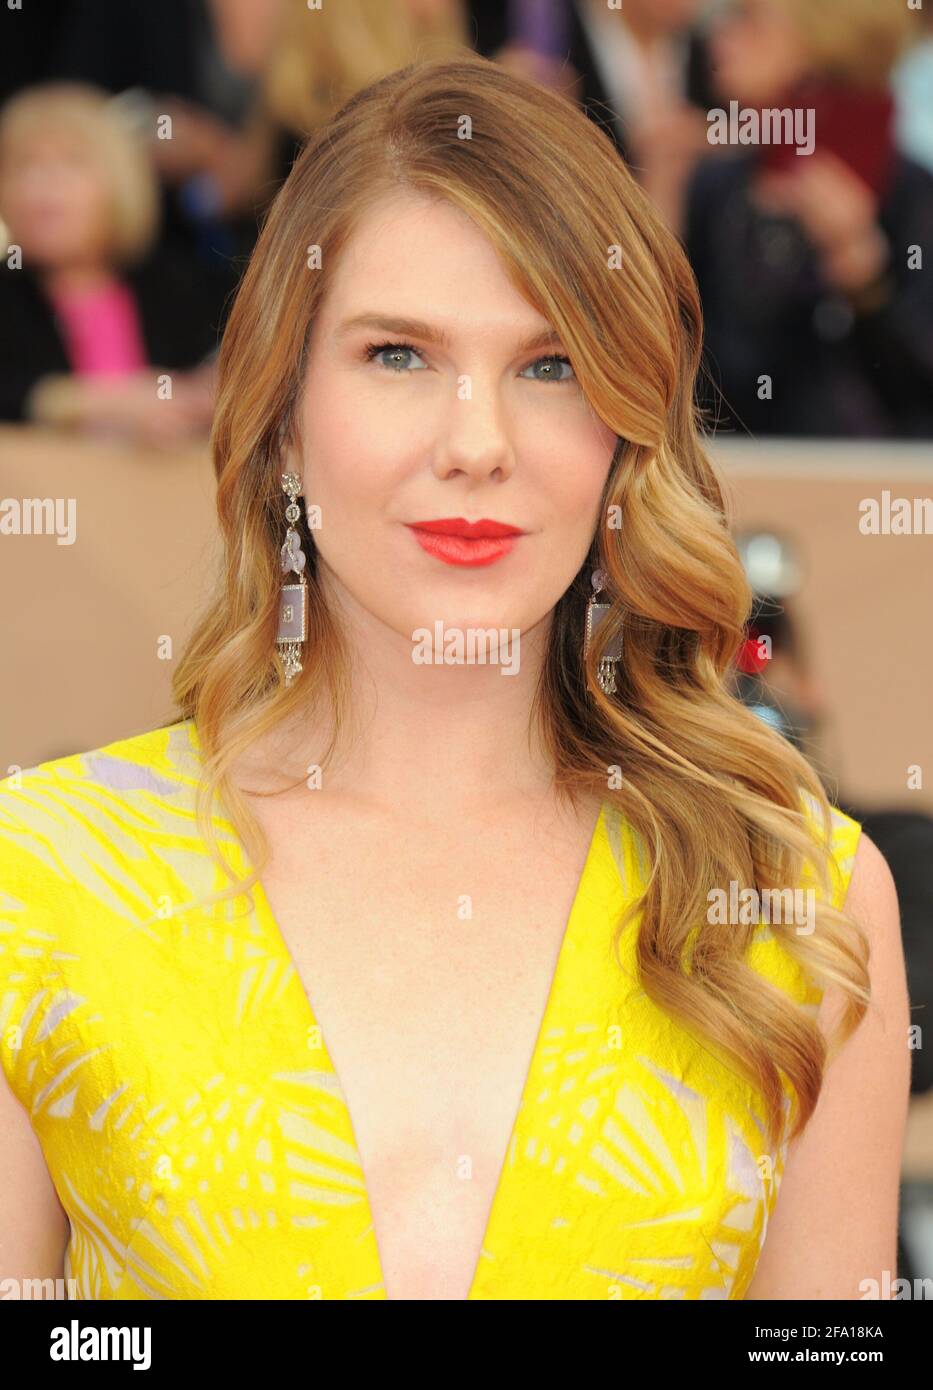 arrivals to the 2016 Sag Awards held in Los Angeles, California Stock Photo